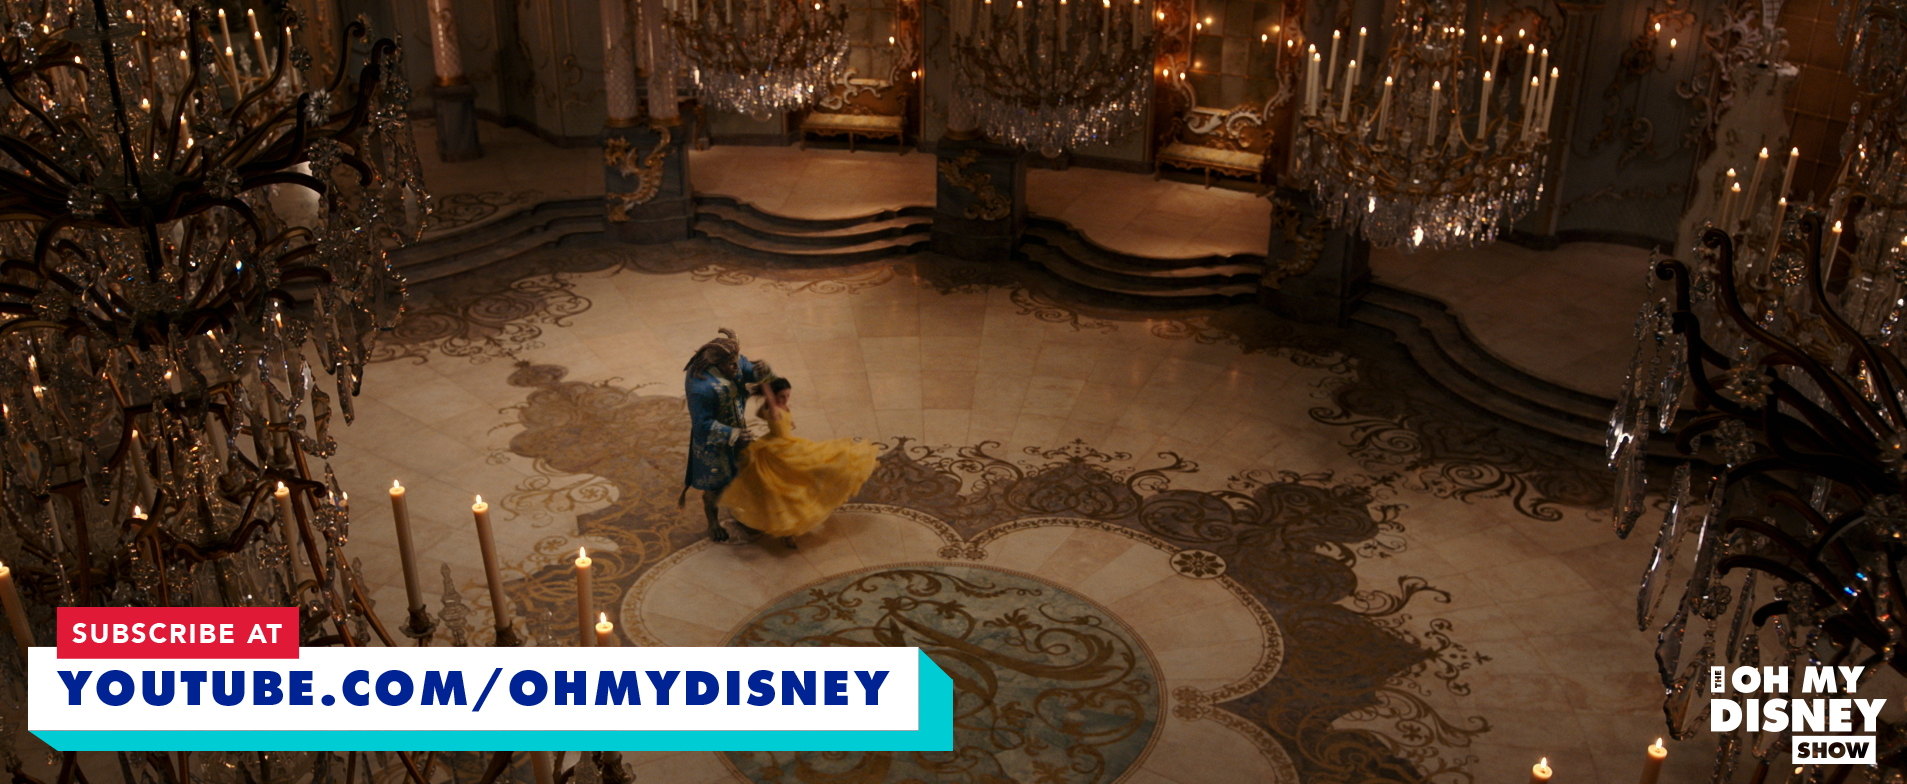 New “Beauty And The Beast” Clip On New ‘Oh My Disney’ Channel